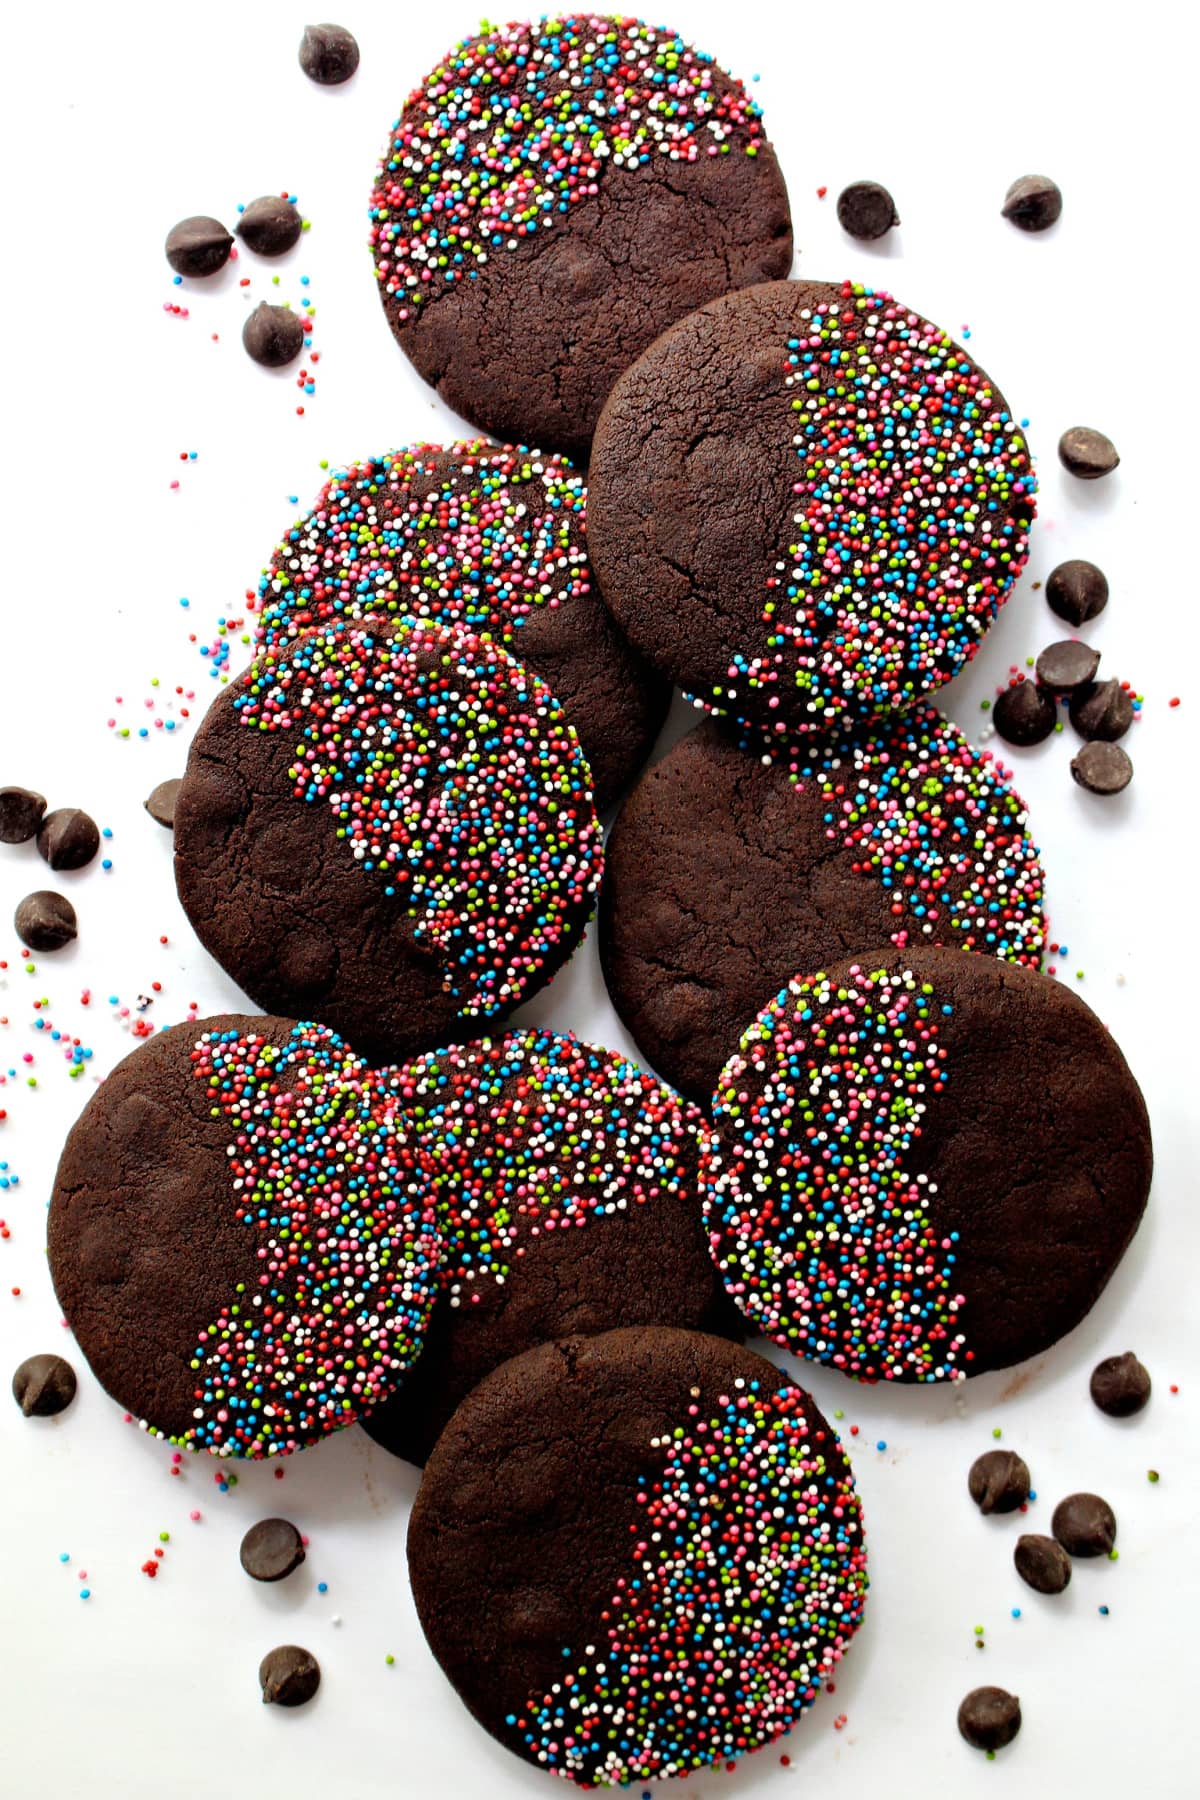 Dark chocolate brown cookies with multicolored nonpareil sprinkles covering half of the cookie top.